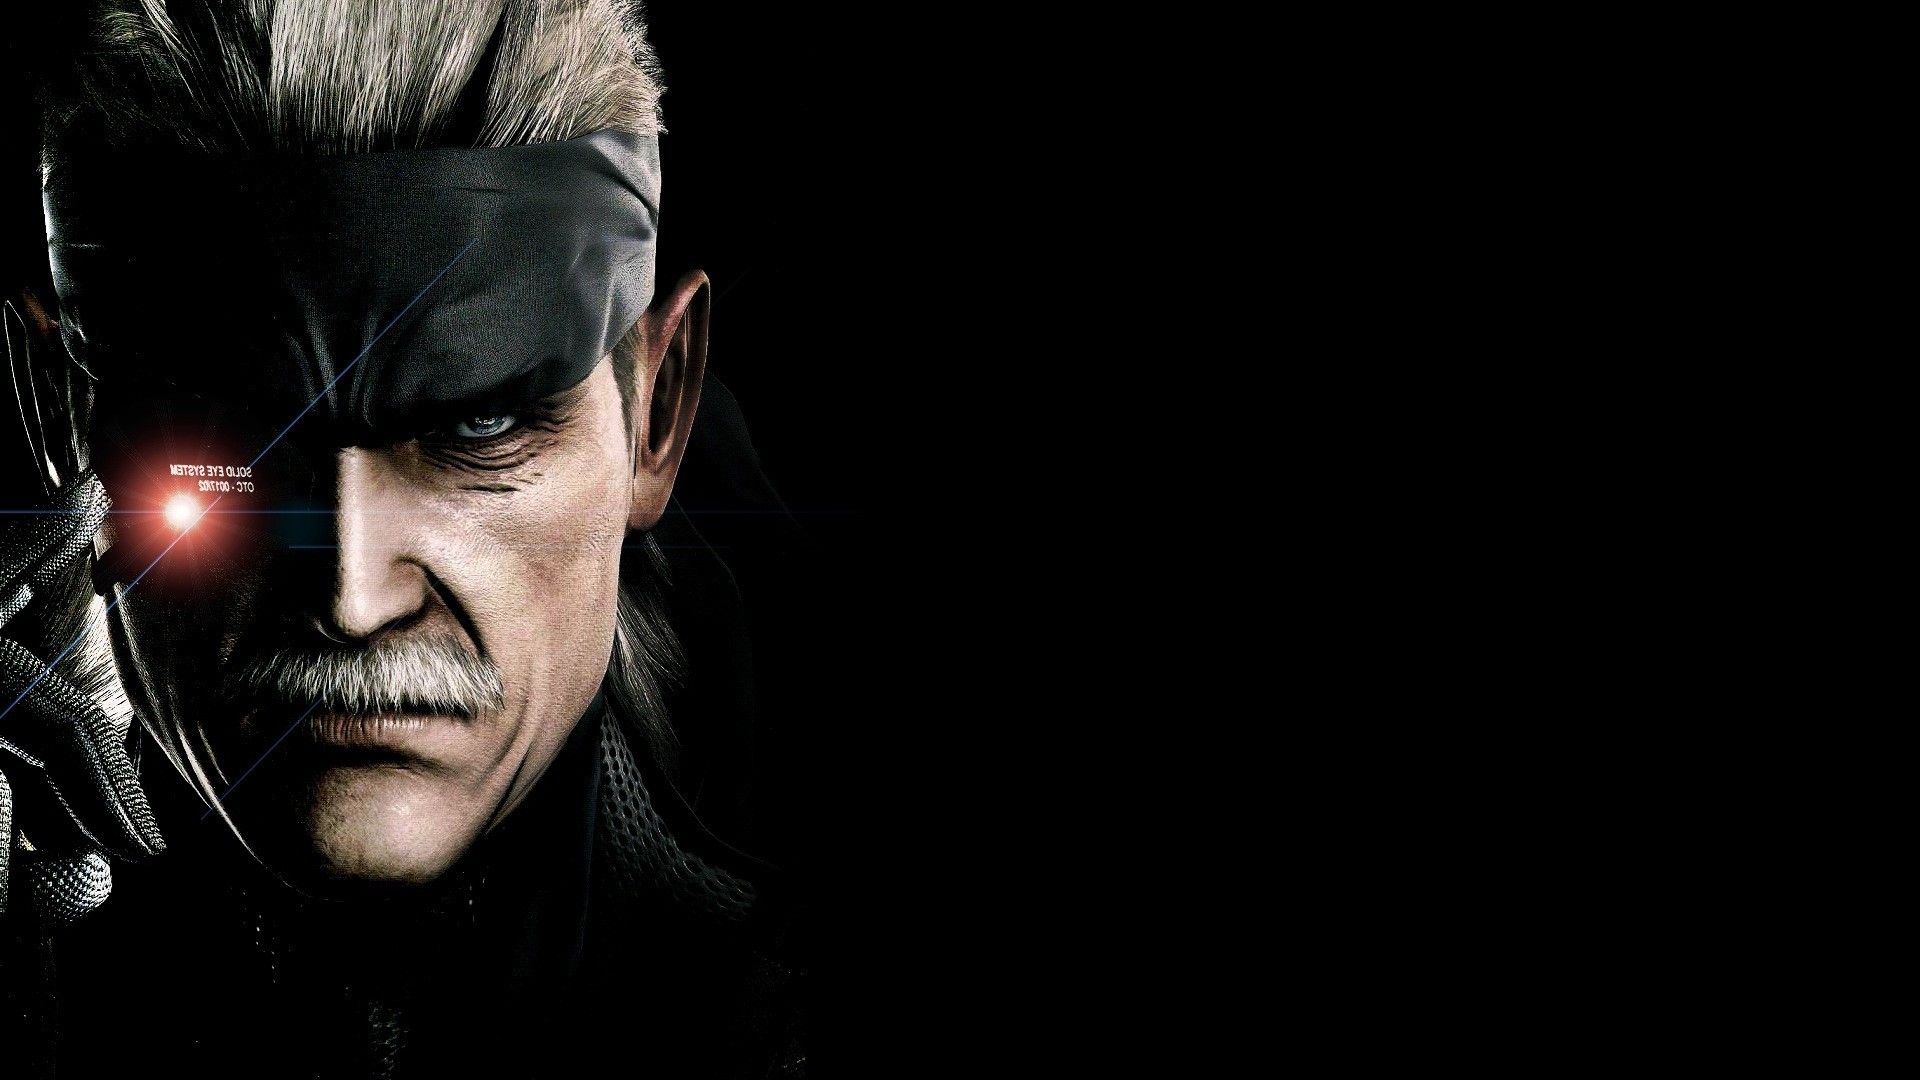 1920x1080 Sniper Wolf Wallpapers Group | HD Wallpapers | Pinterest | Hd wallpaper and  Wallpaper